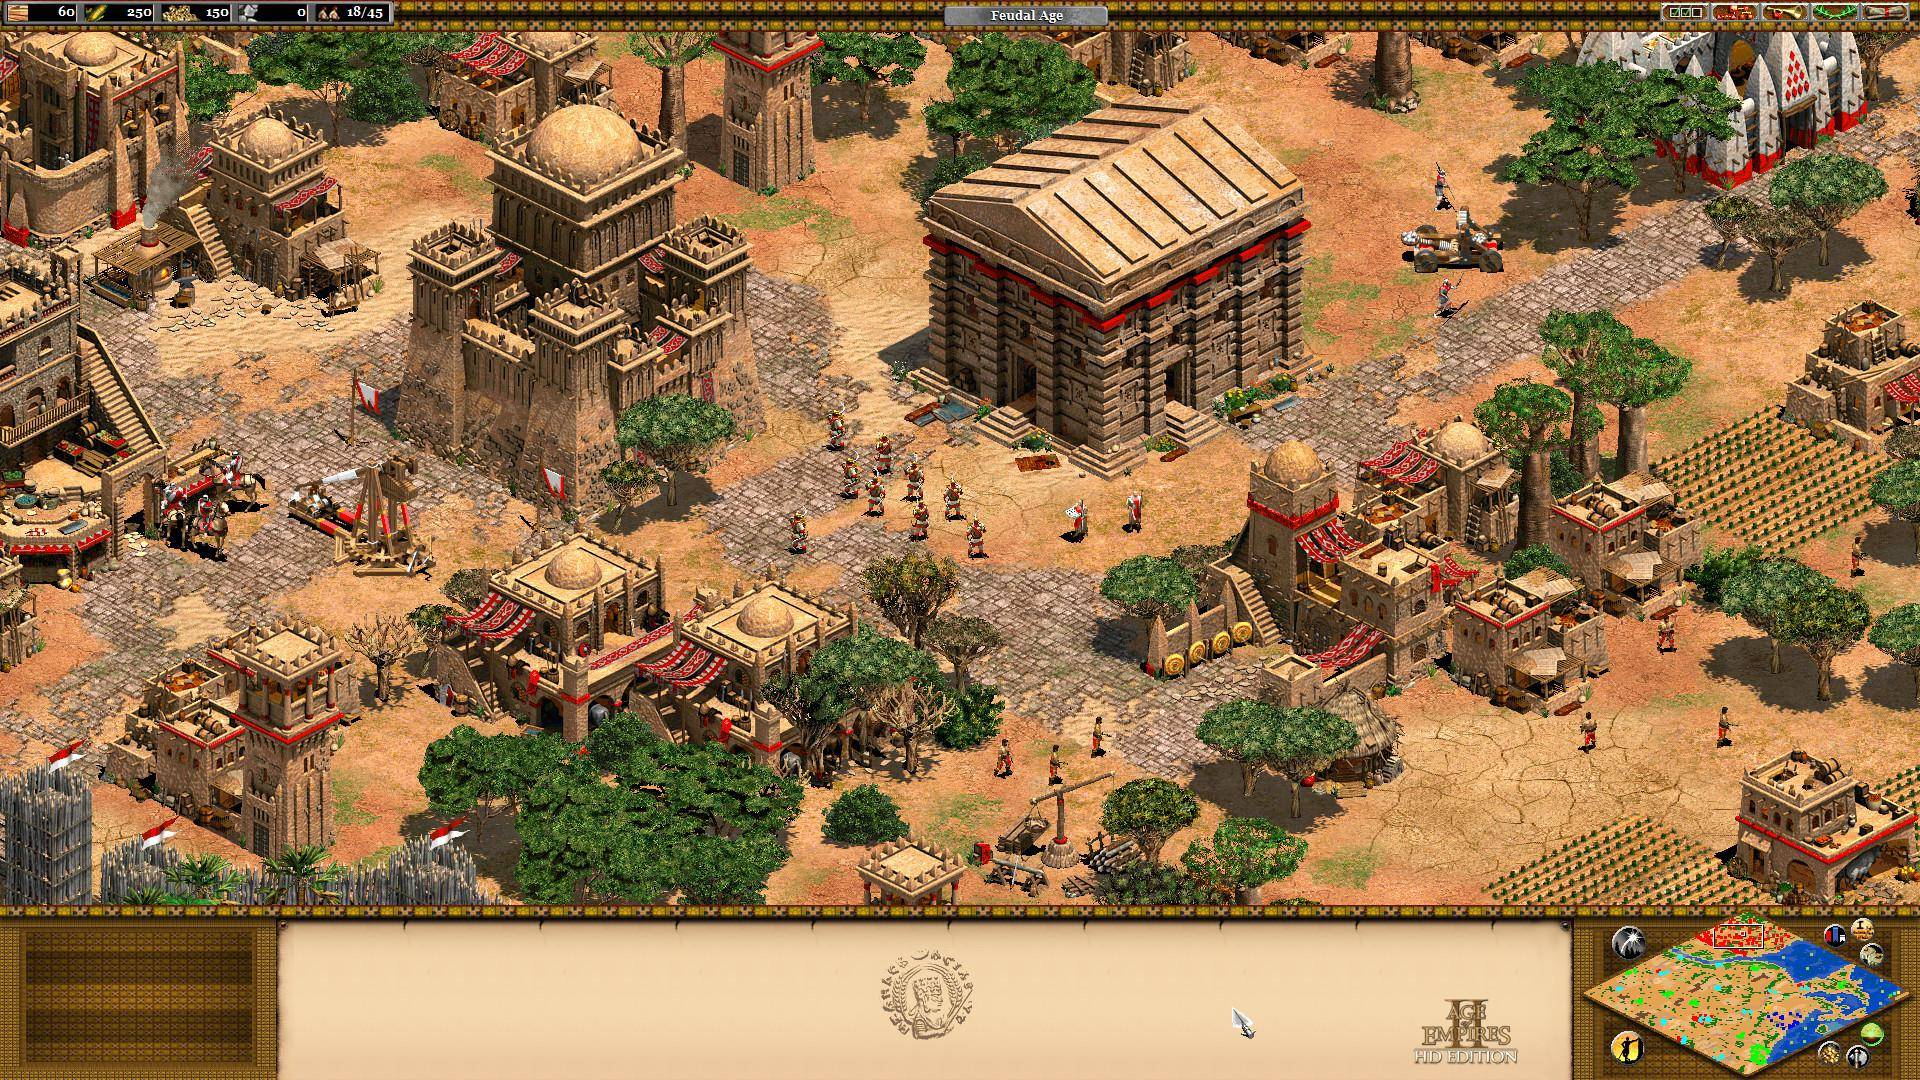 download age of empires 2 free